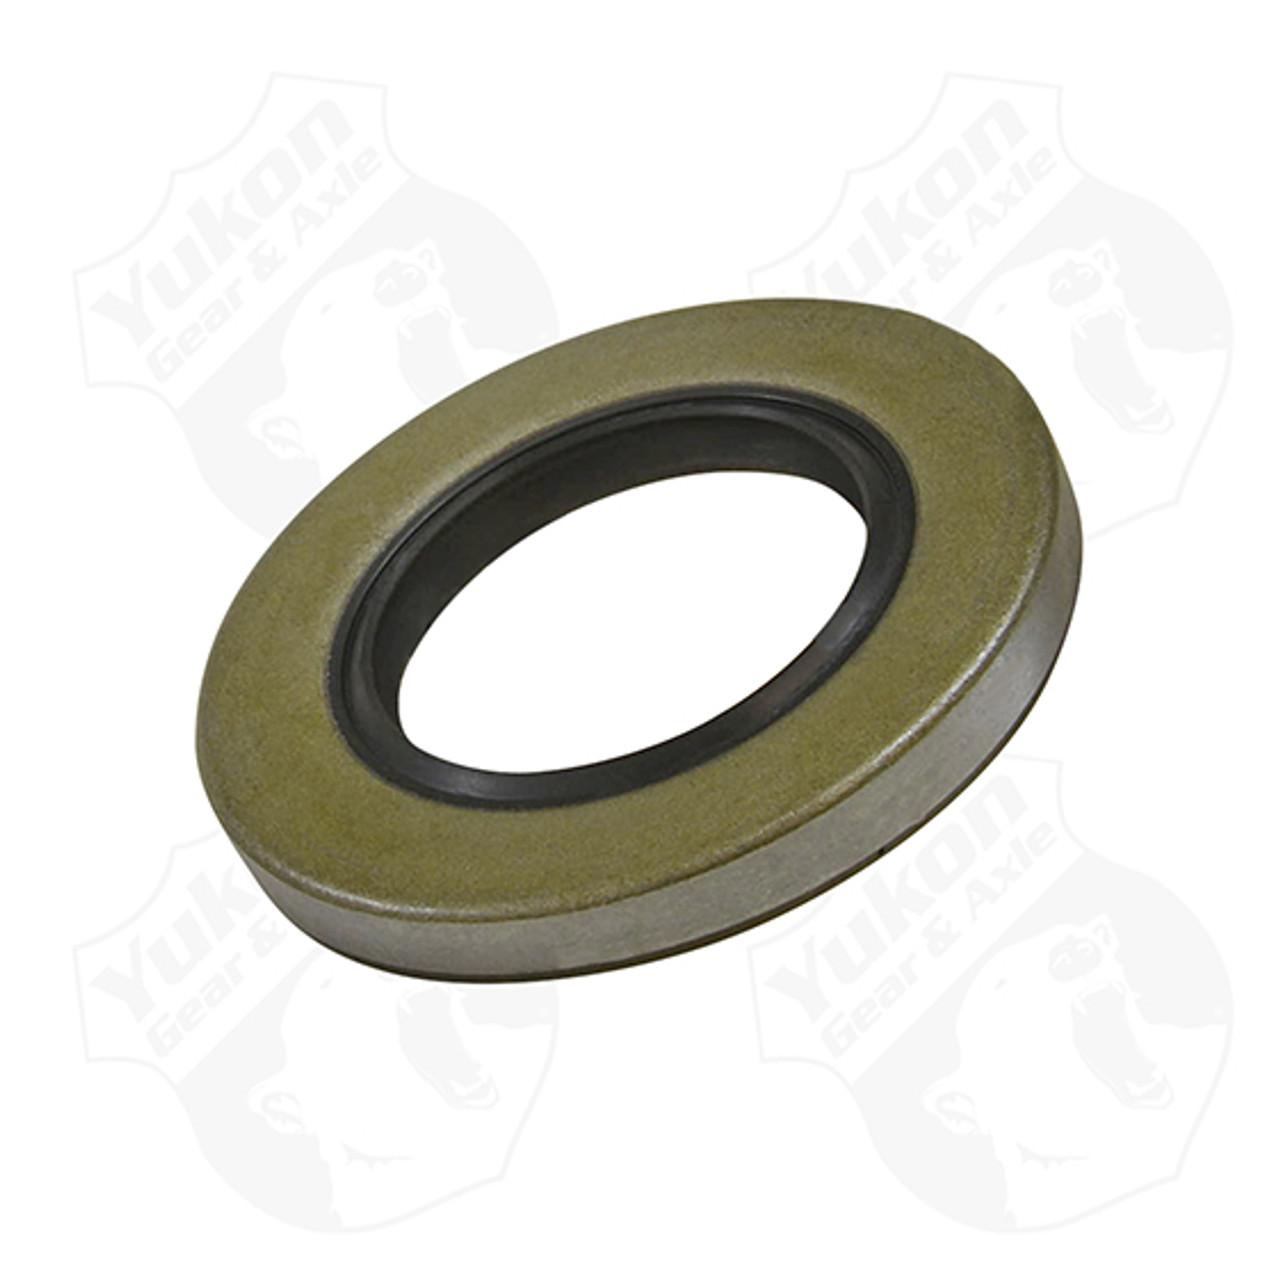 Replacement Inner axle seal for Dana 44 with 19 spline axles and Dana 30 Volvo rear